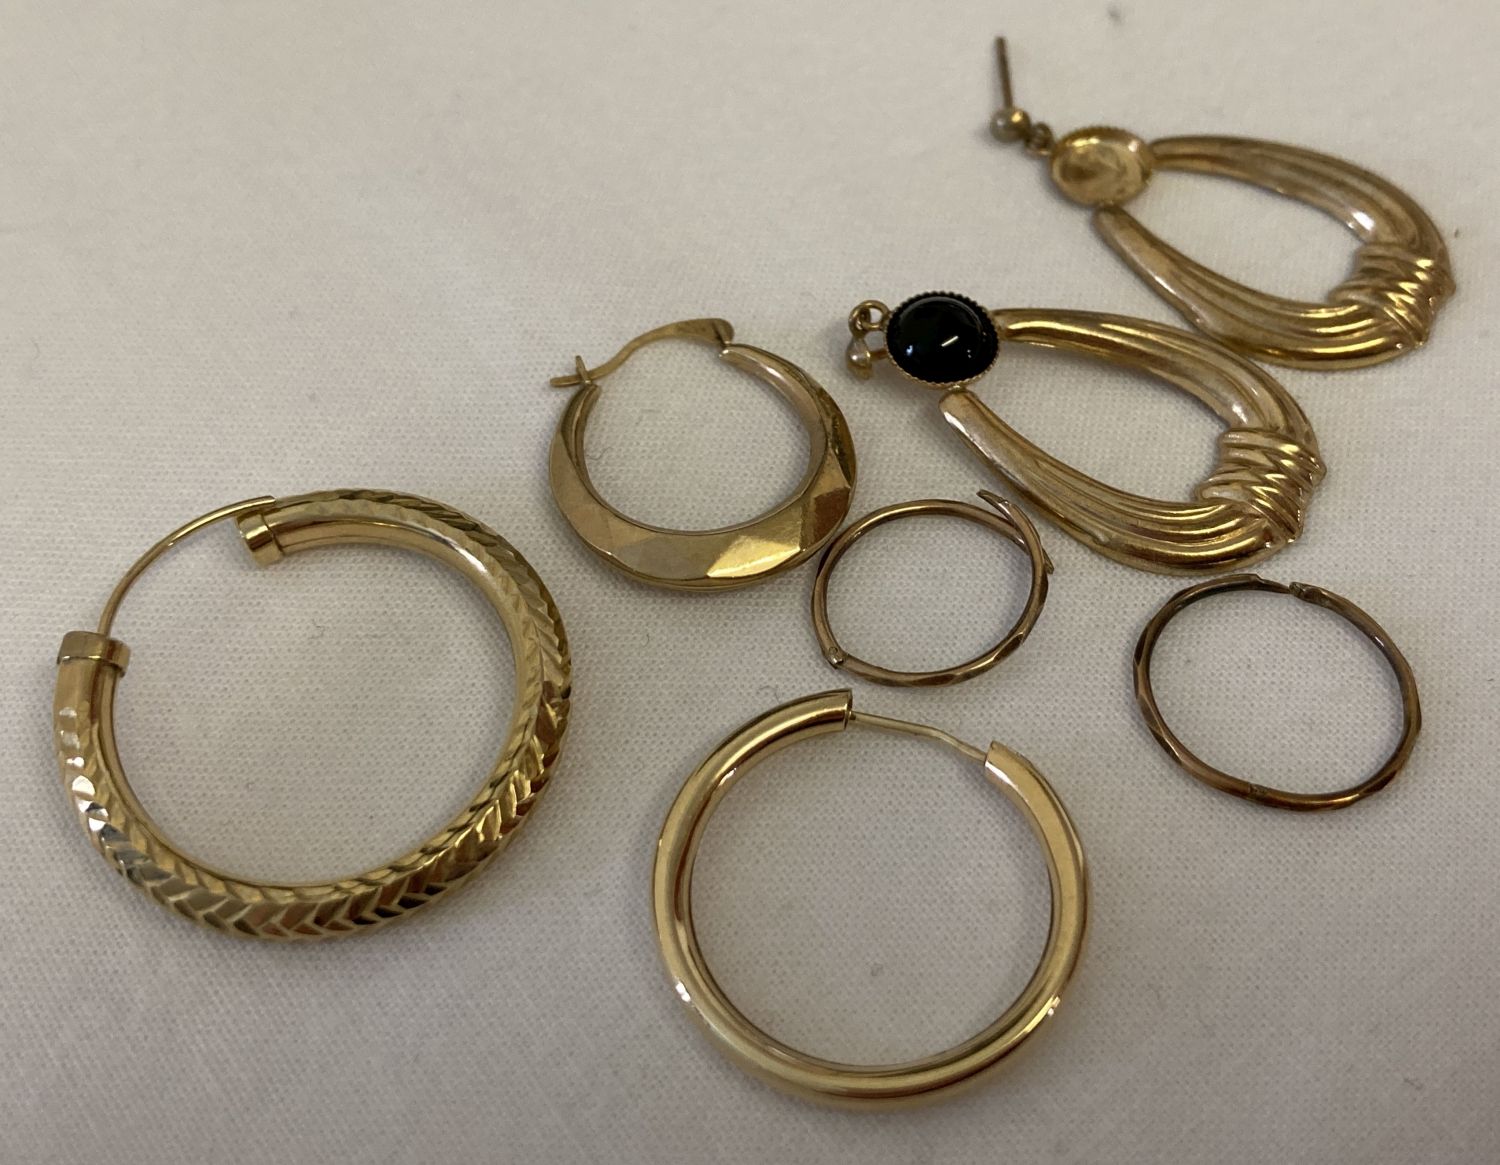 A small quantity of scrap gold single earrings.